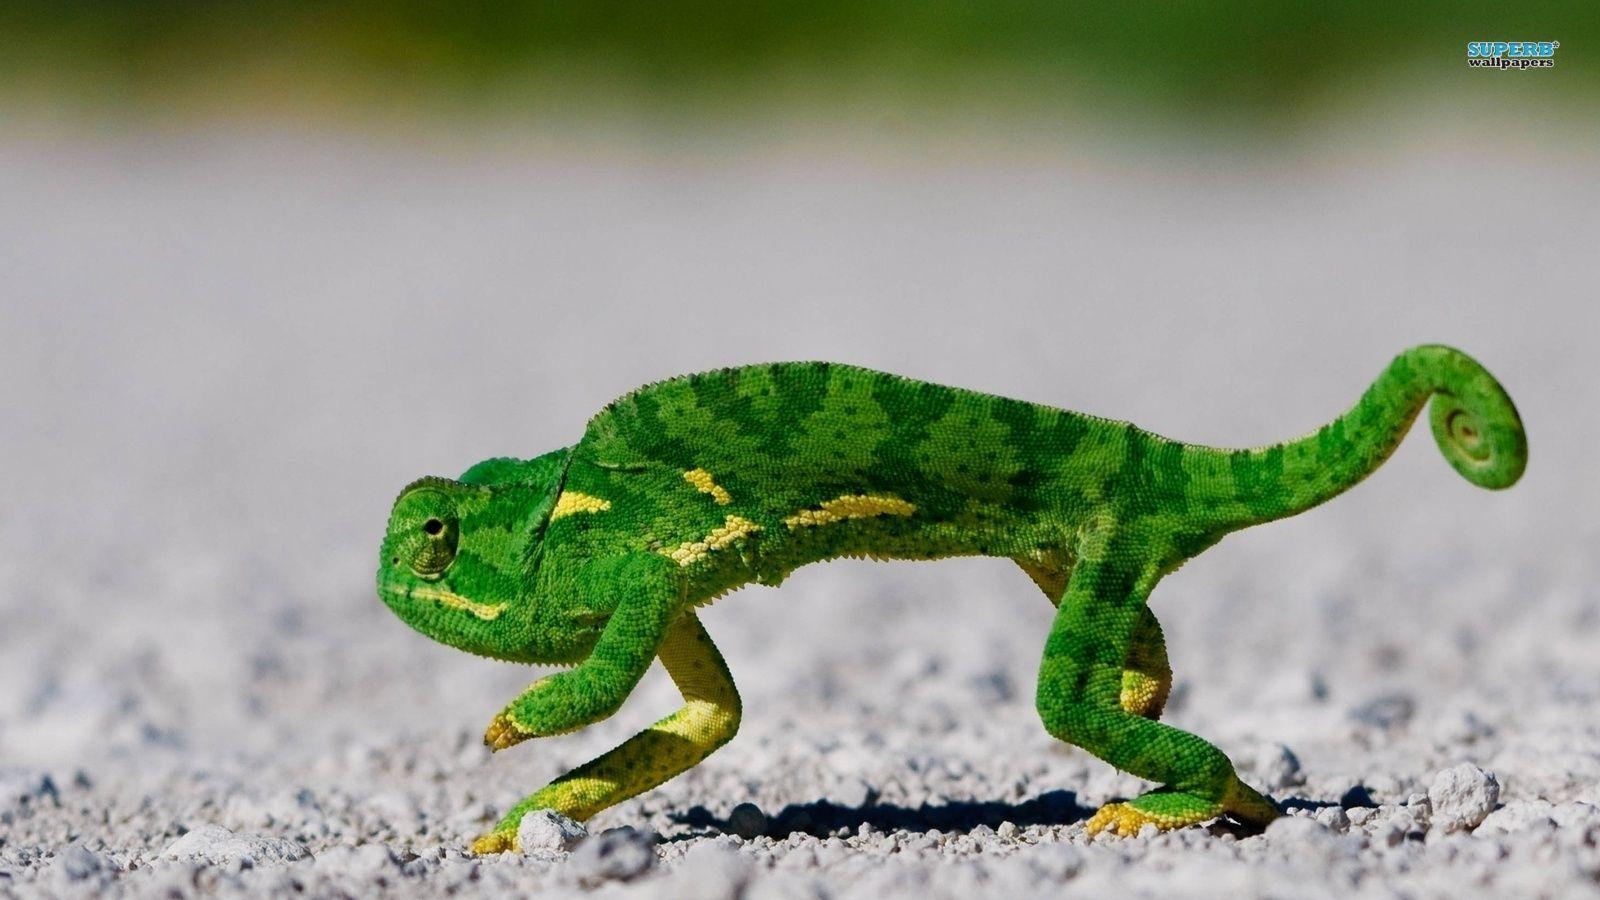 lizards image Chameleon HD wallpaper and background photo